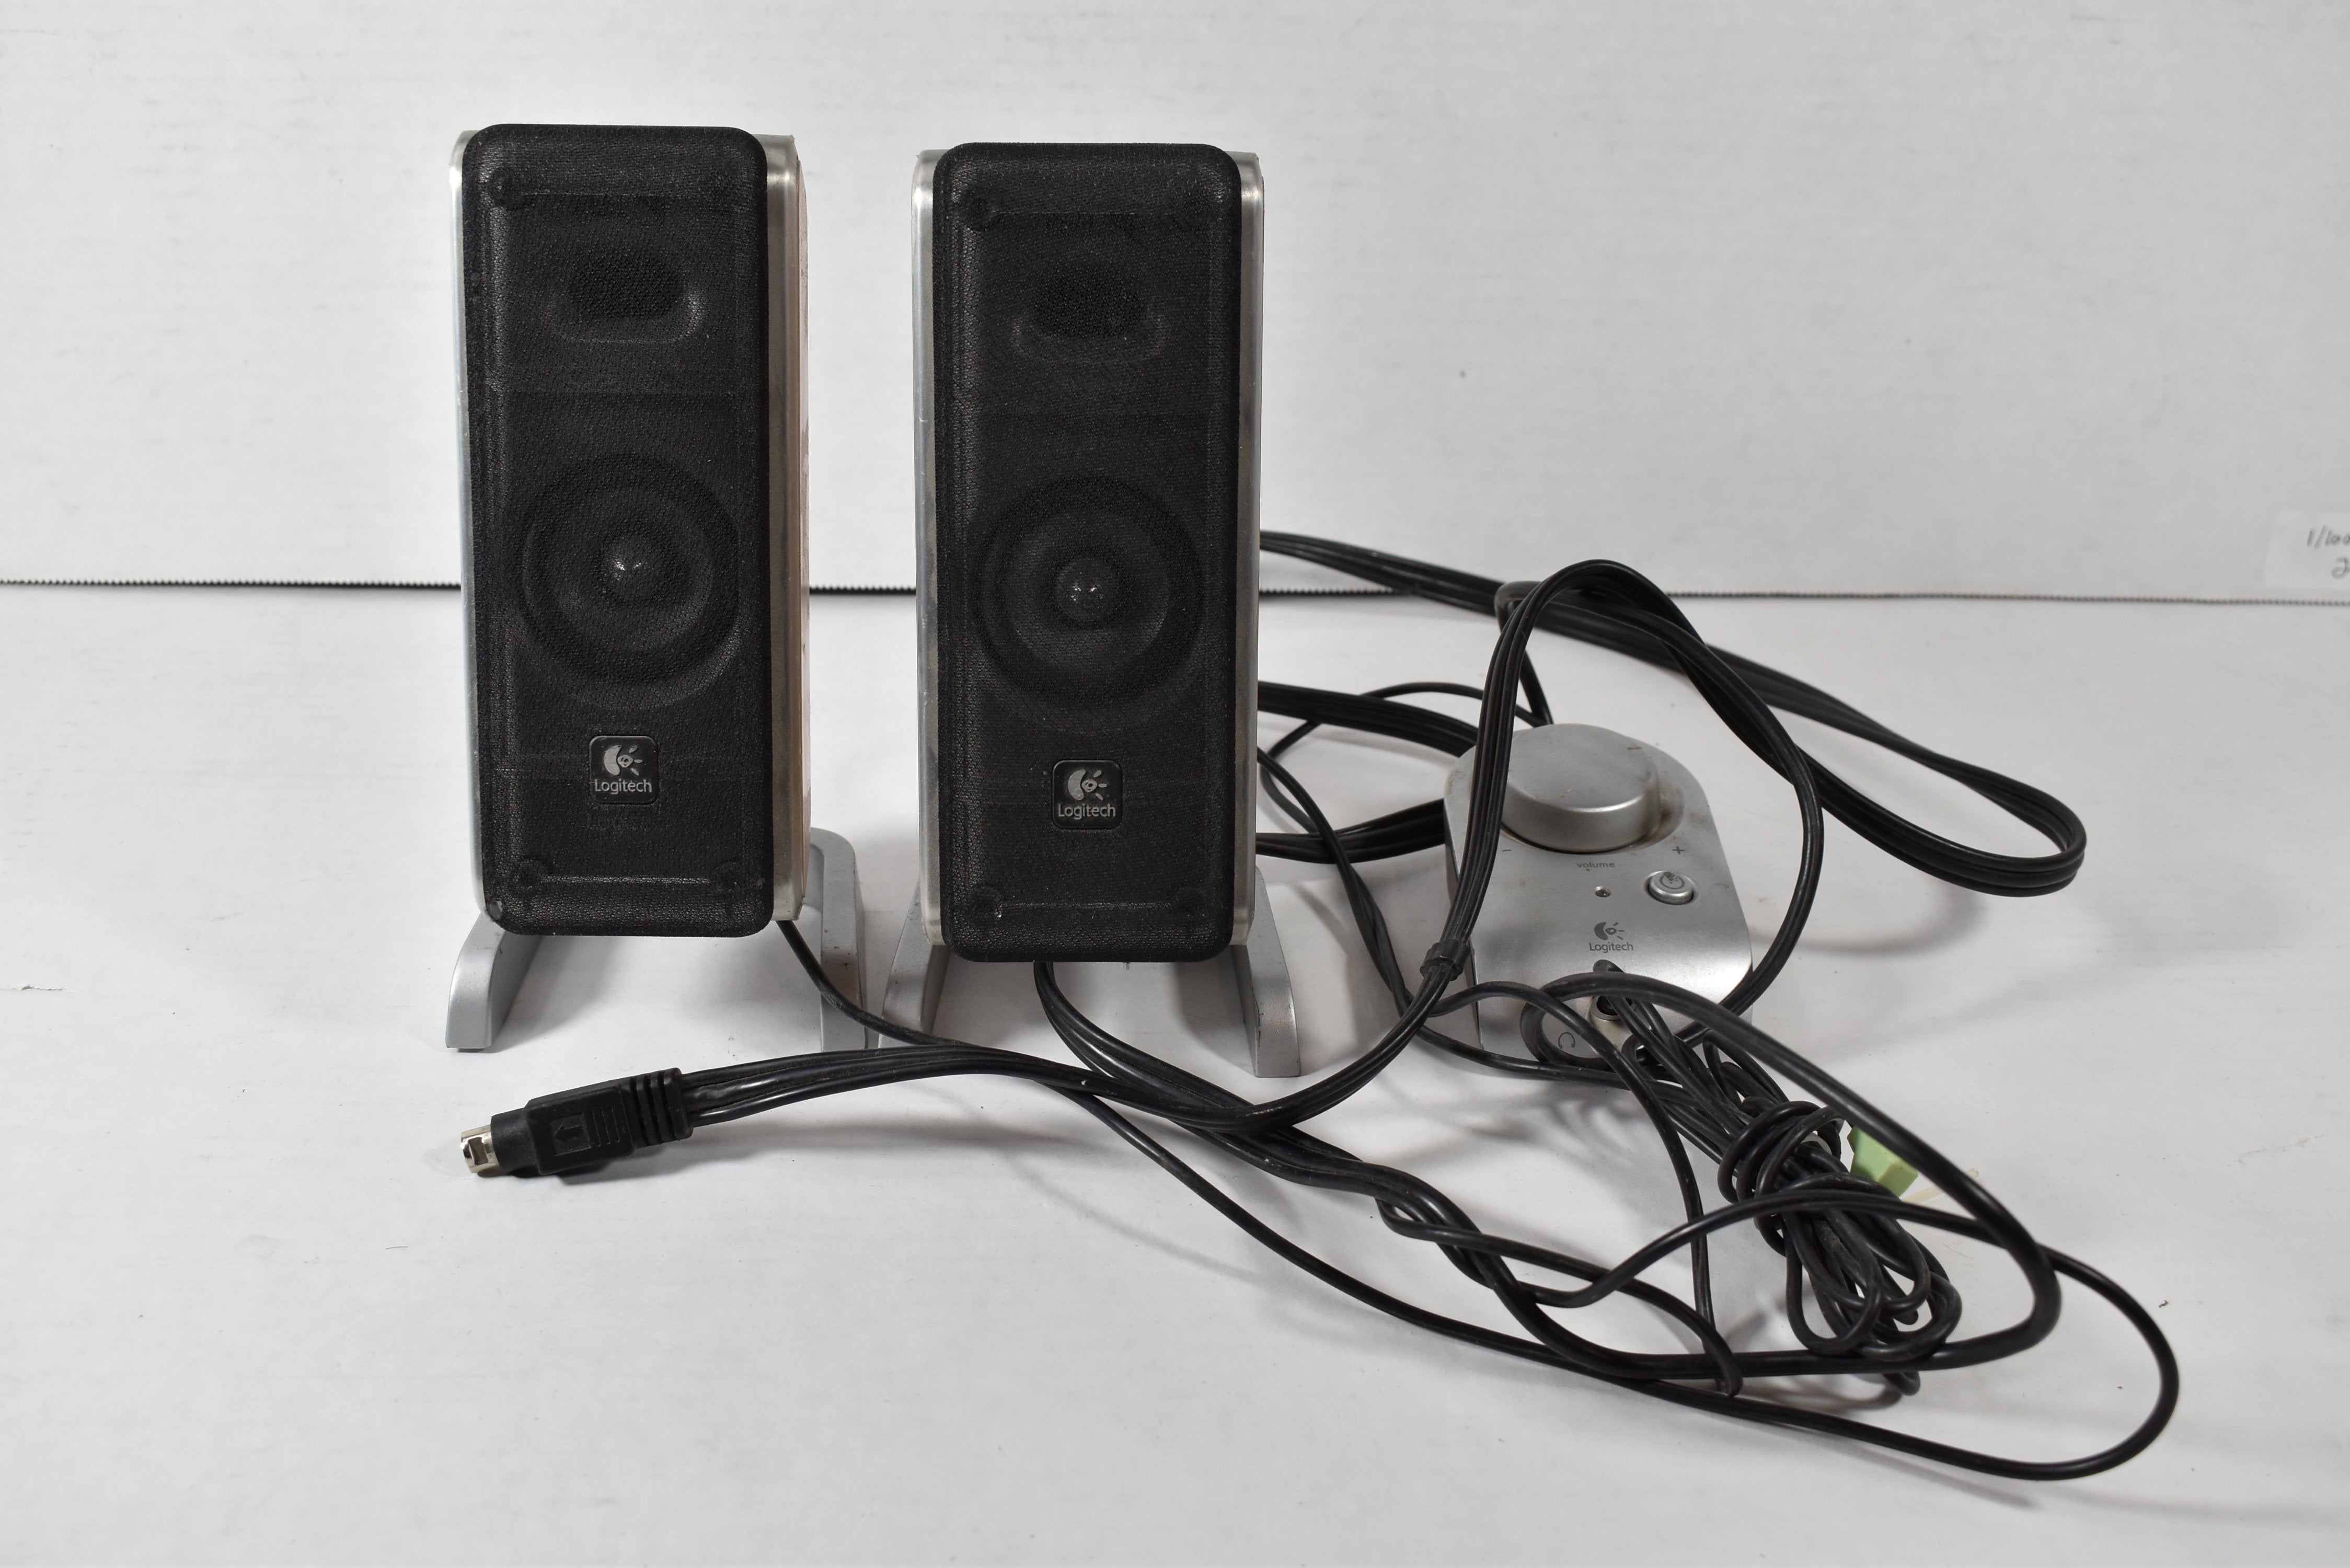 Logitech Speakers 901173 L & R USED TESTED